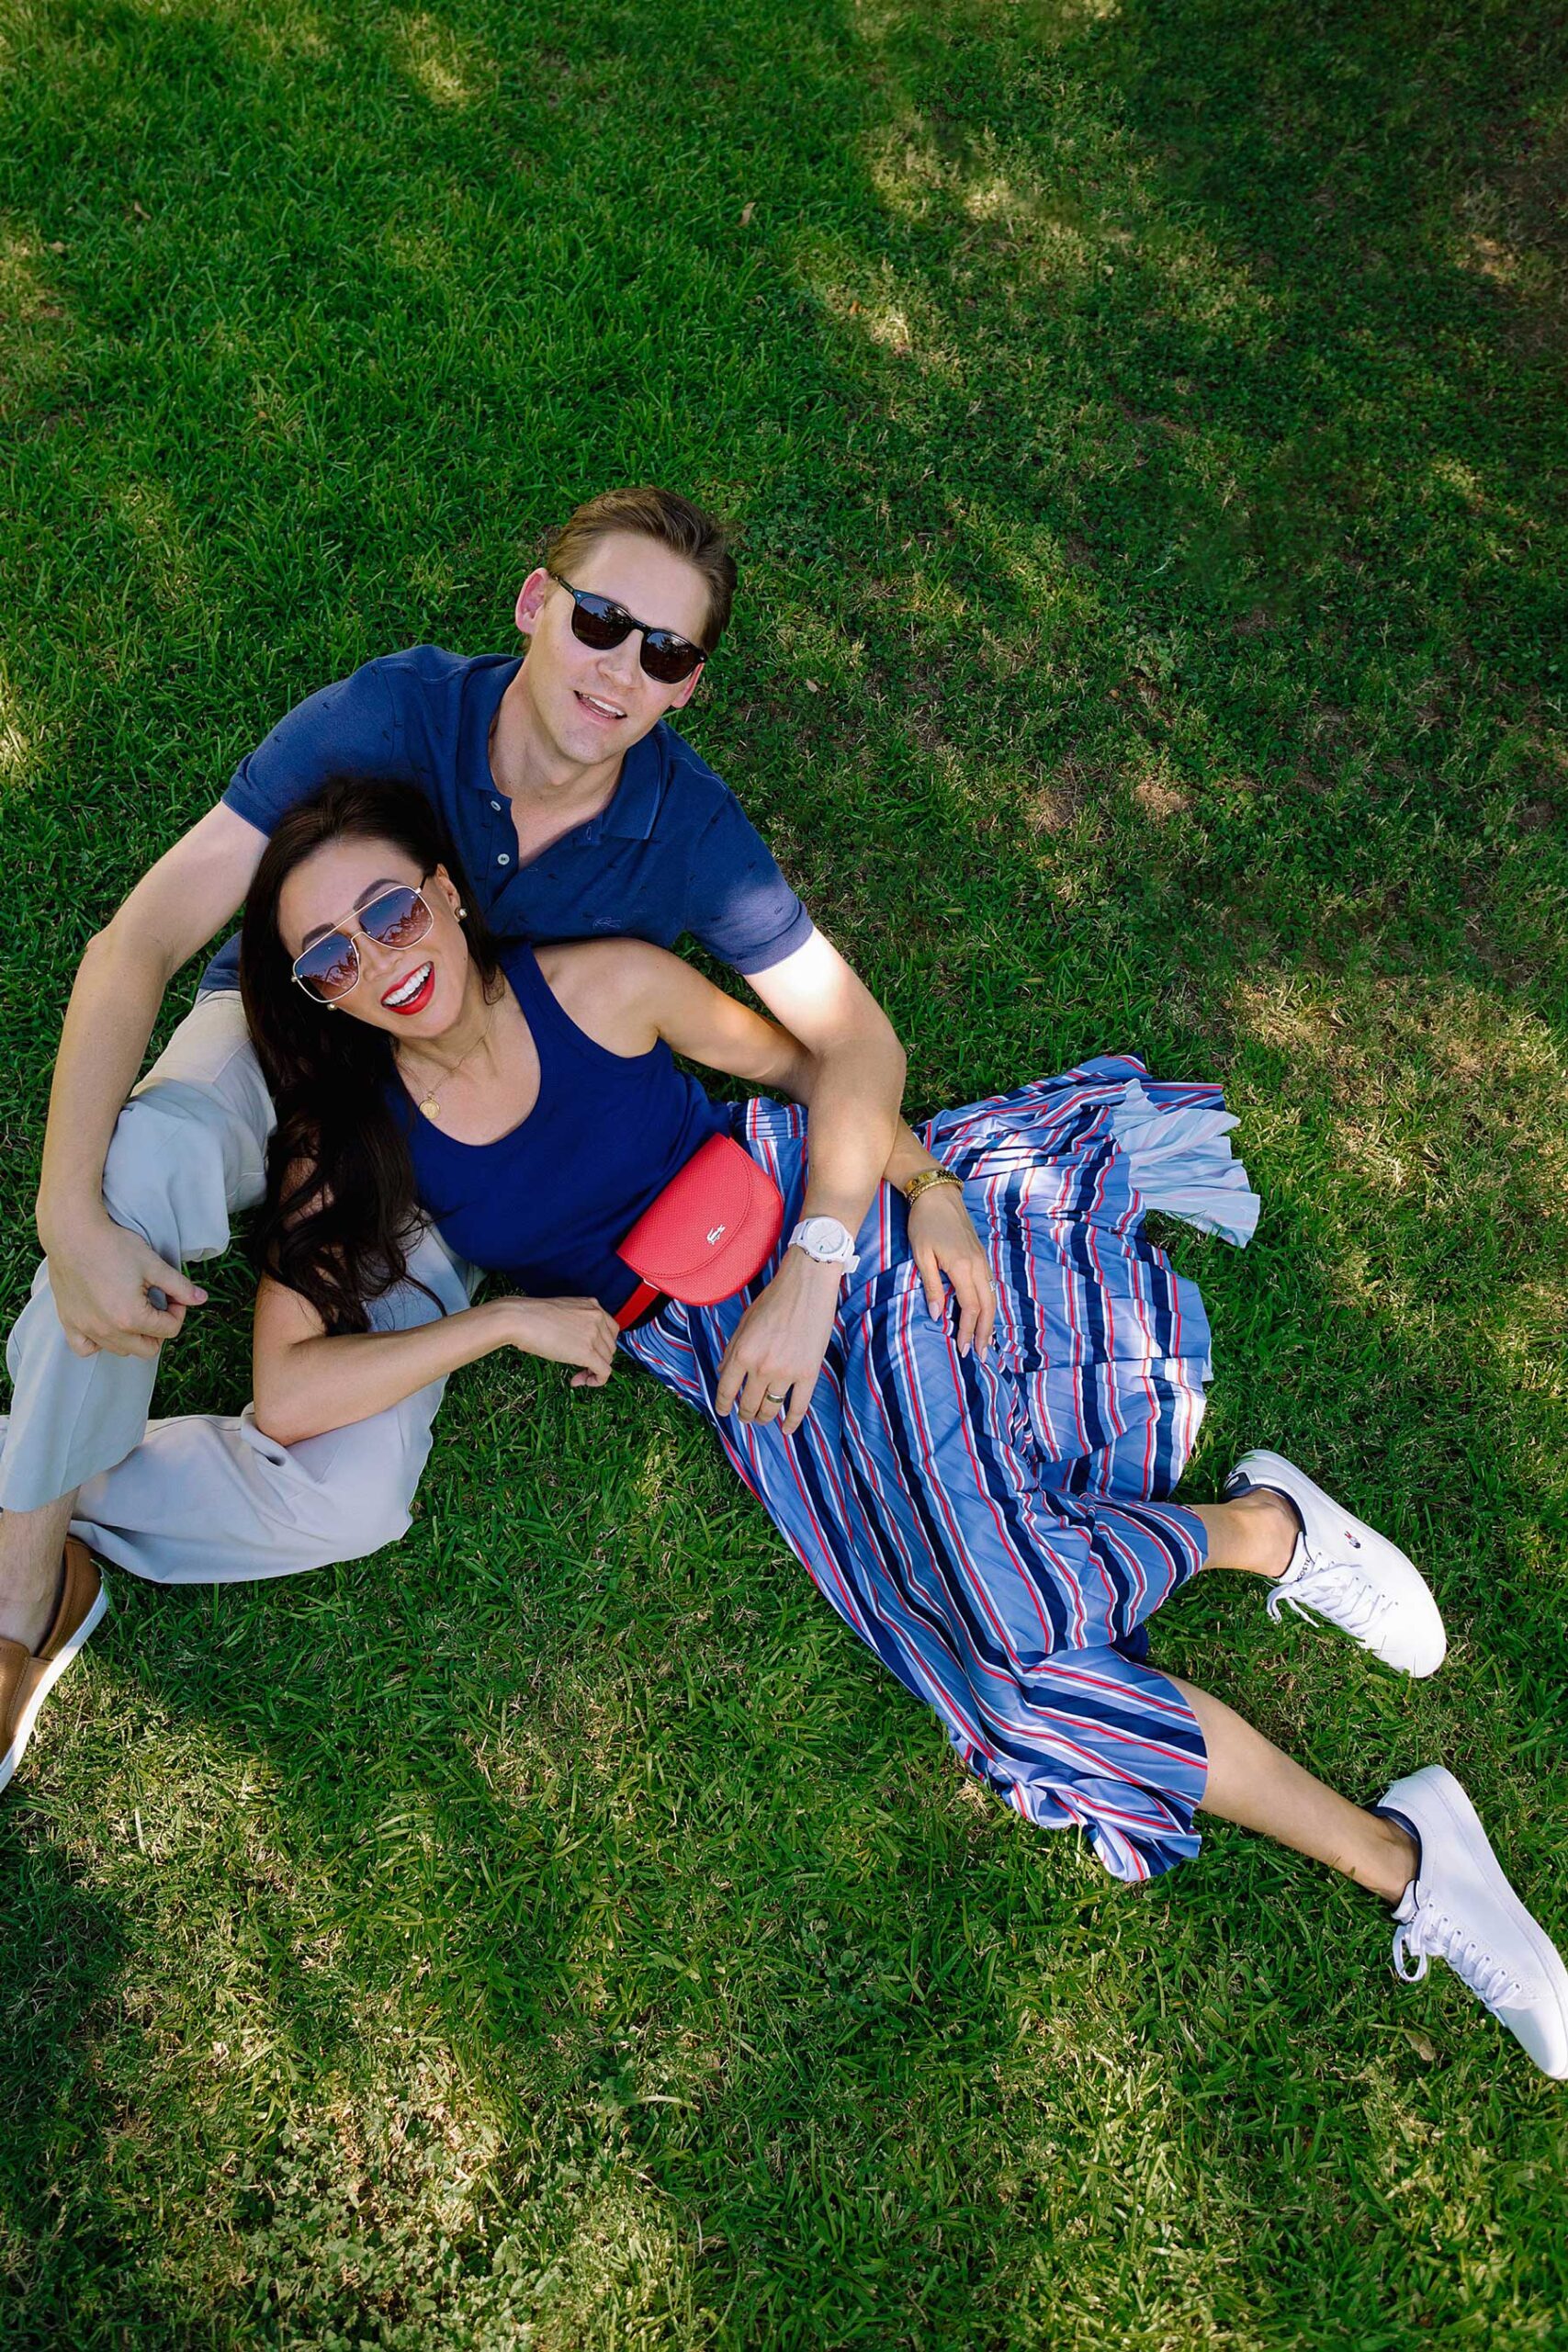 lacoste clothing couple photo in grass pose